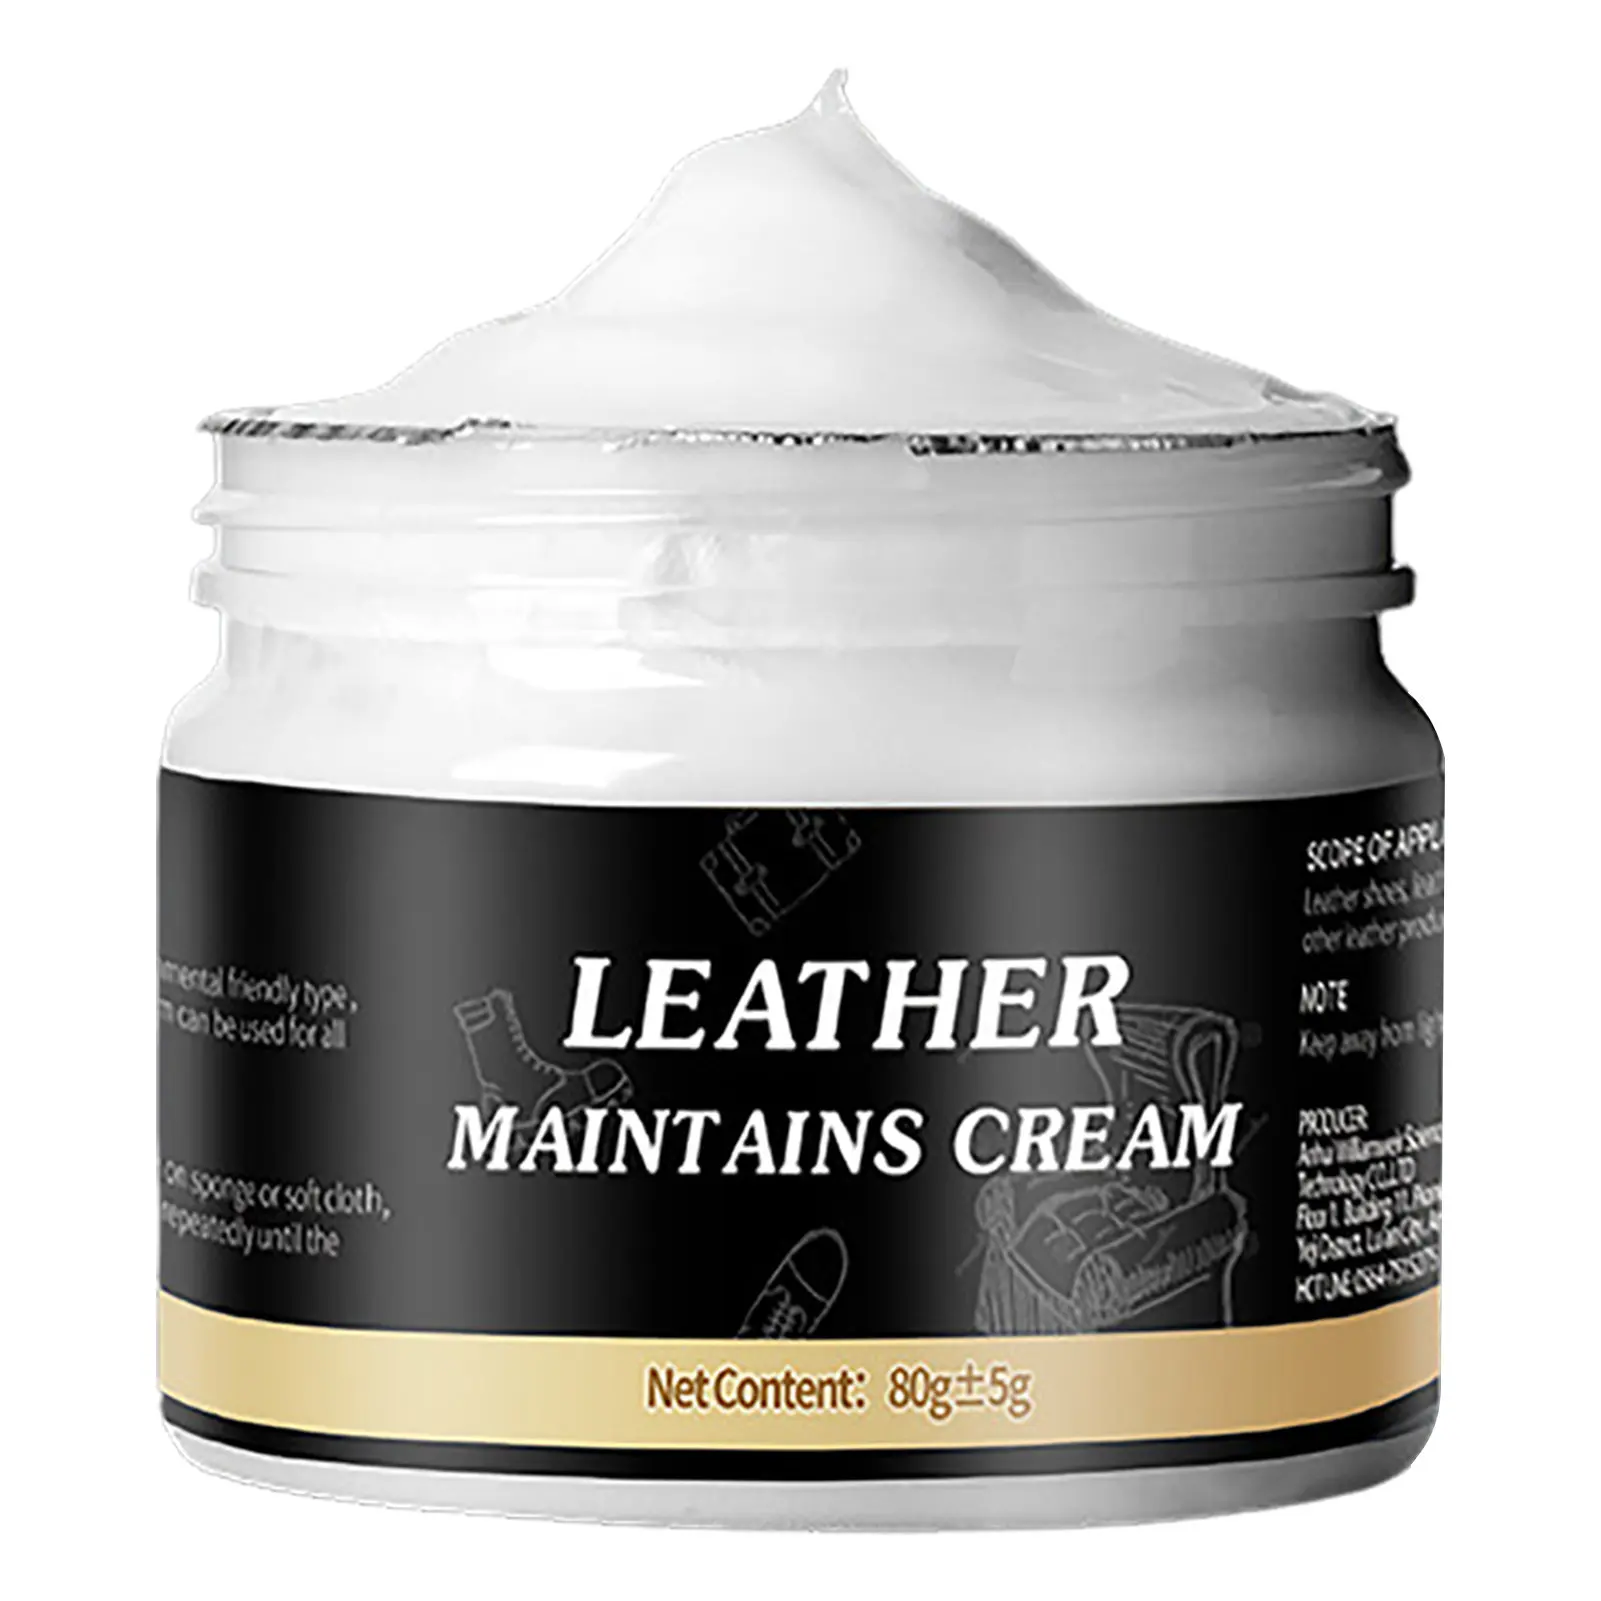 Leather Cream Scratch Filler Formula Repairs Couch Tears Burn Holes For Jacket Shoes Sofa Leather Repair Kits For Furniture Keep